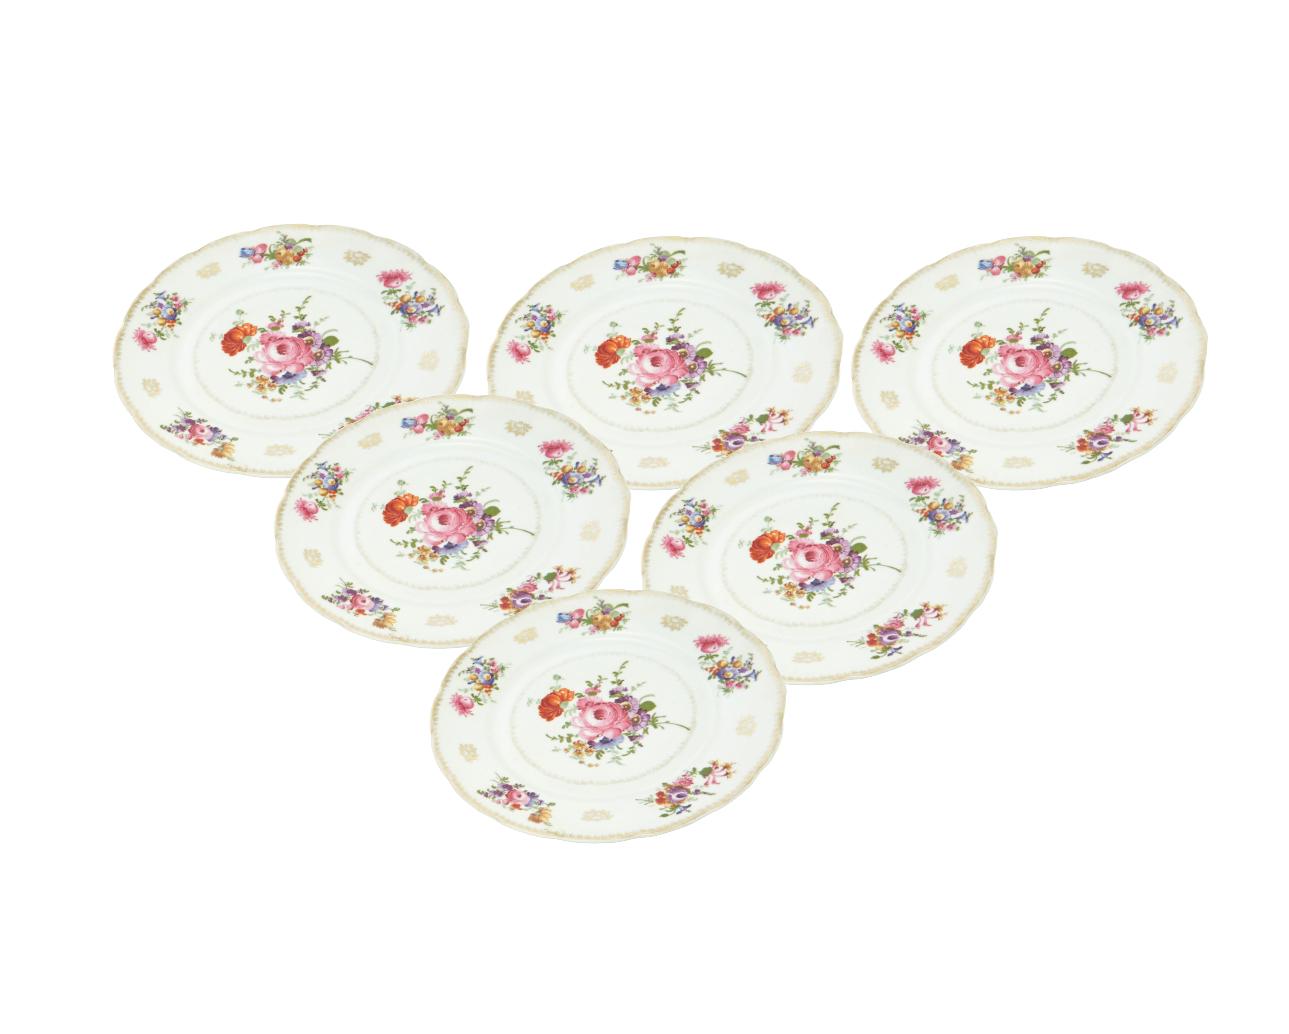 Czech Porcelain Transfer Decorate / Gilt  Dinner Service Plate For 11 People For Sale